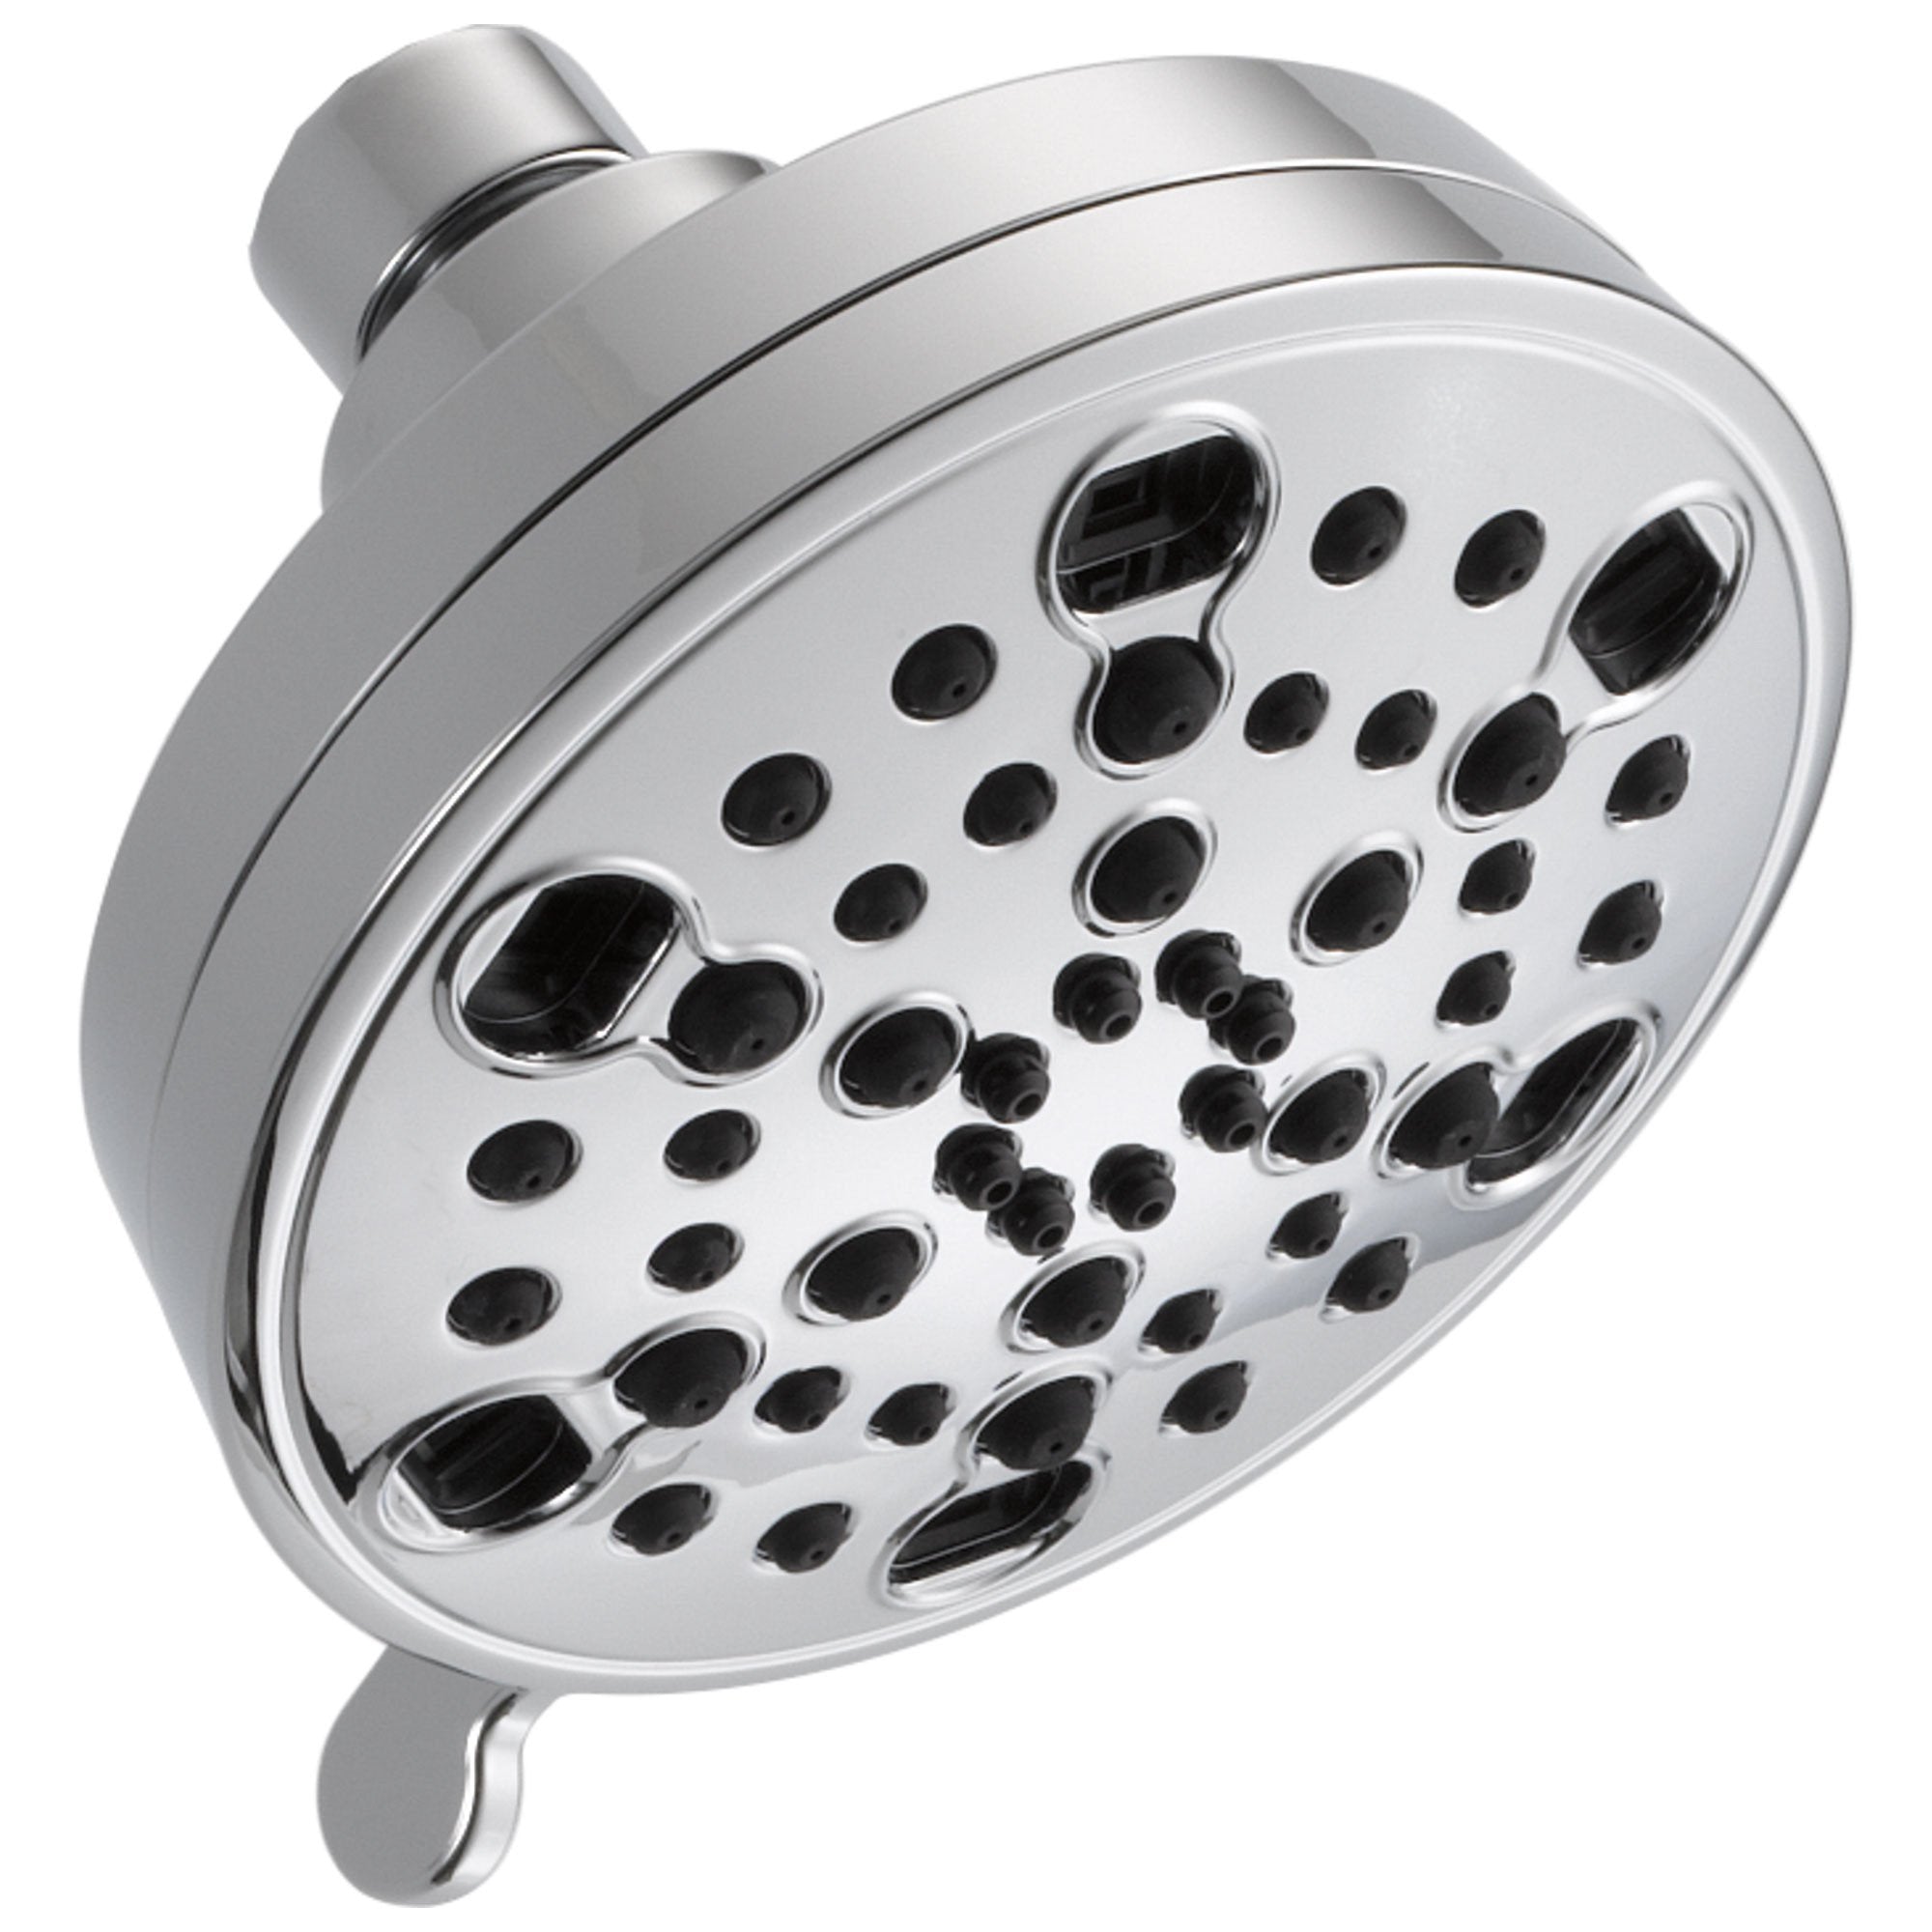 Delta Universal Showering Components Collection Chrome Finish H2Okinetic 5-Setting Contemporary Shower Head 729142